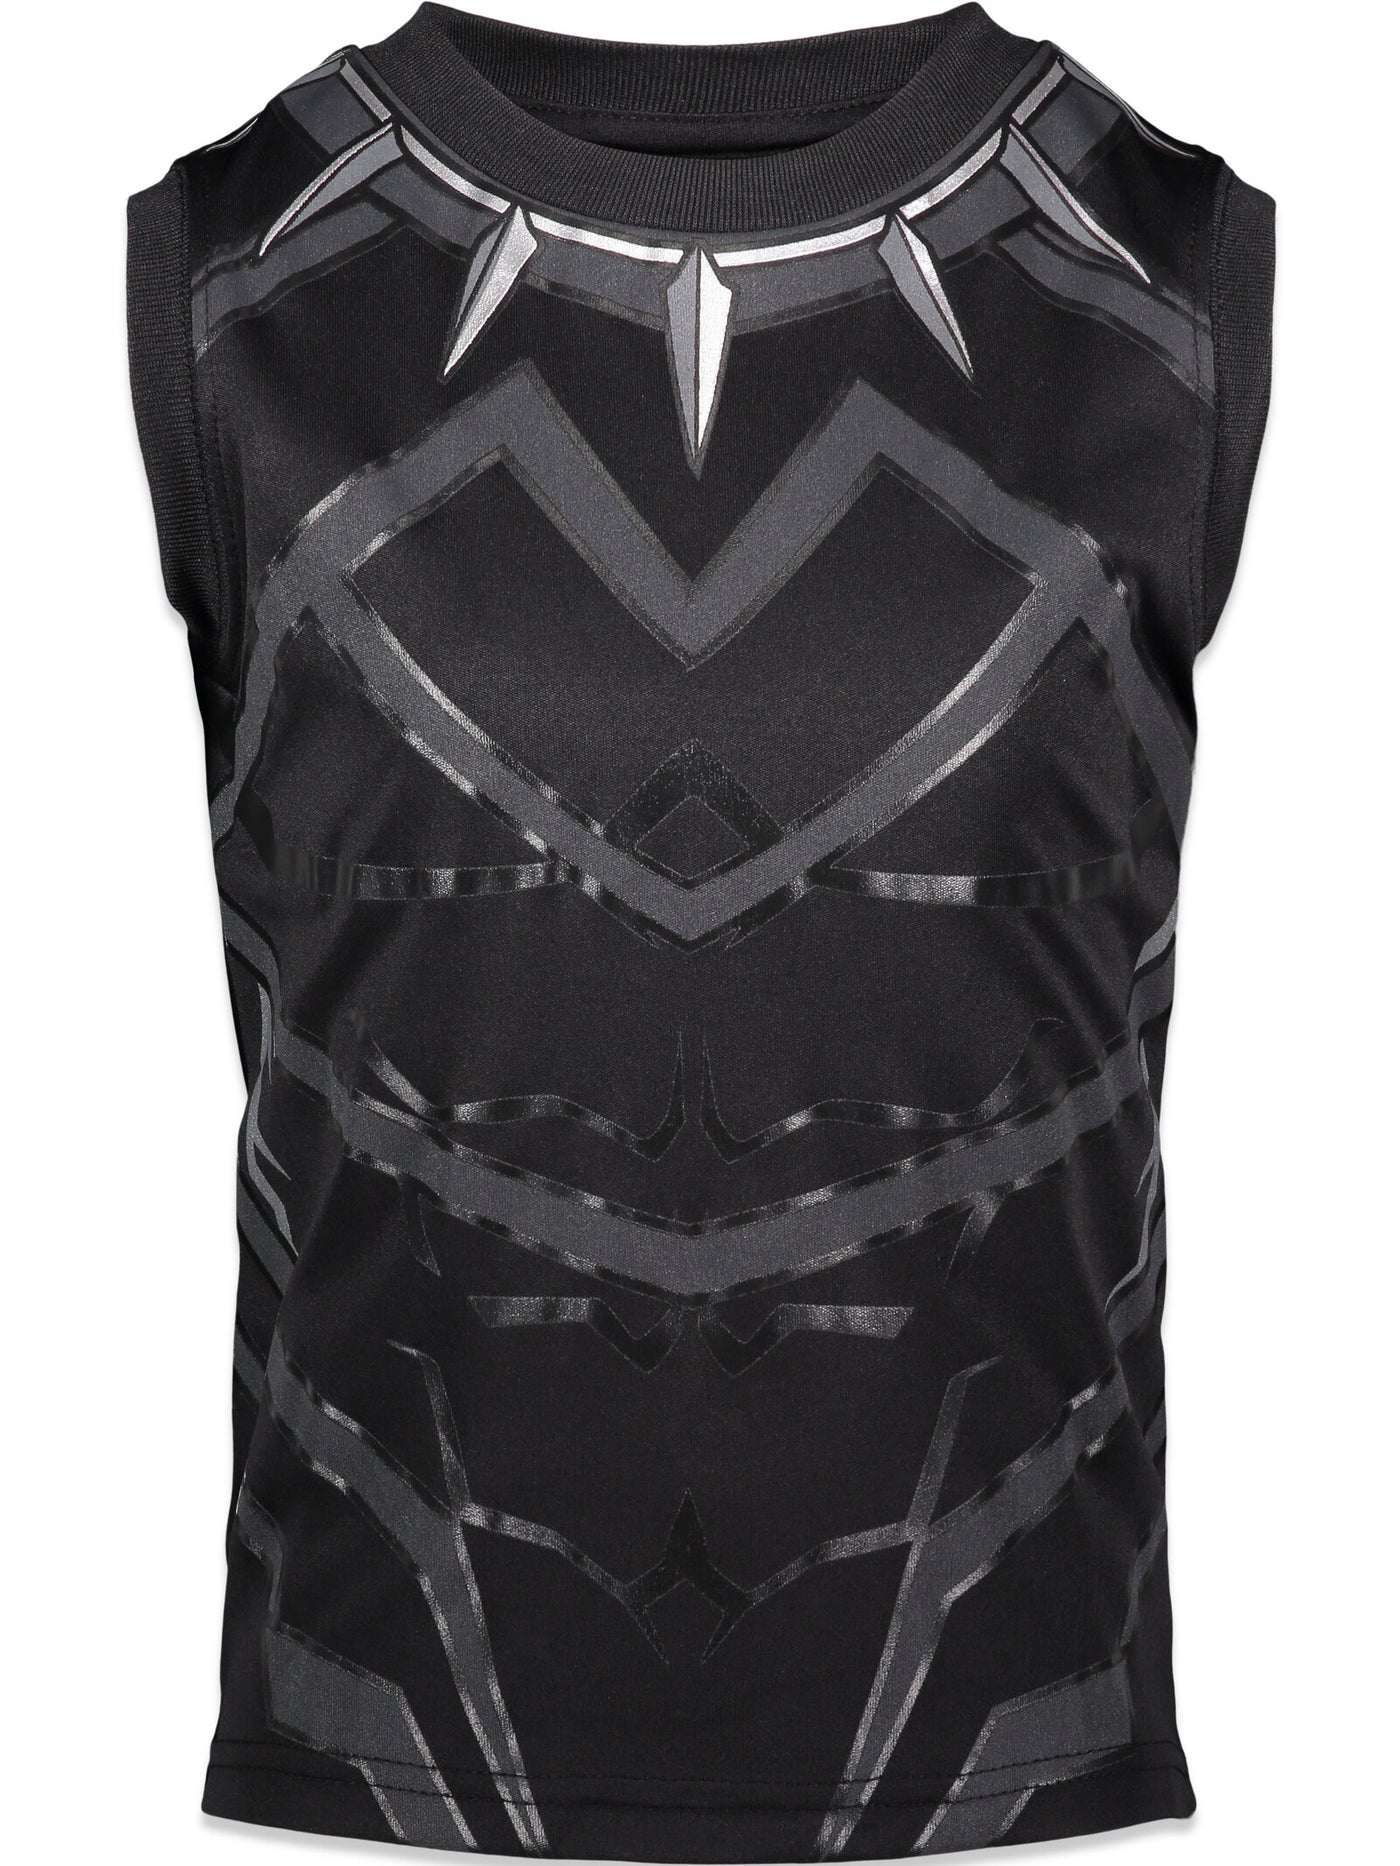 Marvel Avengers Spider-Man Tank Top and Mesh Shorts